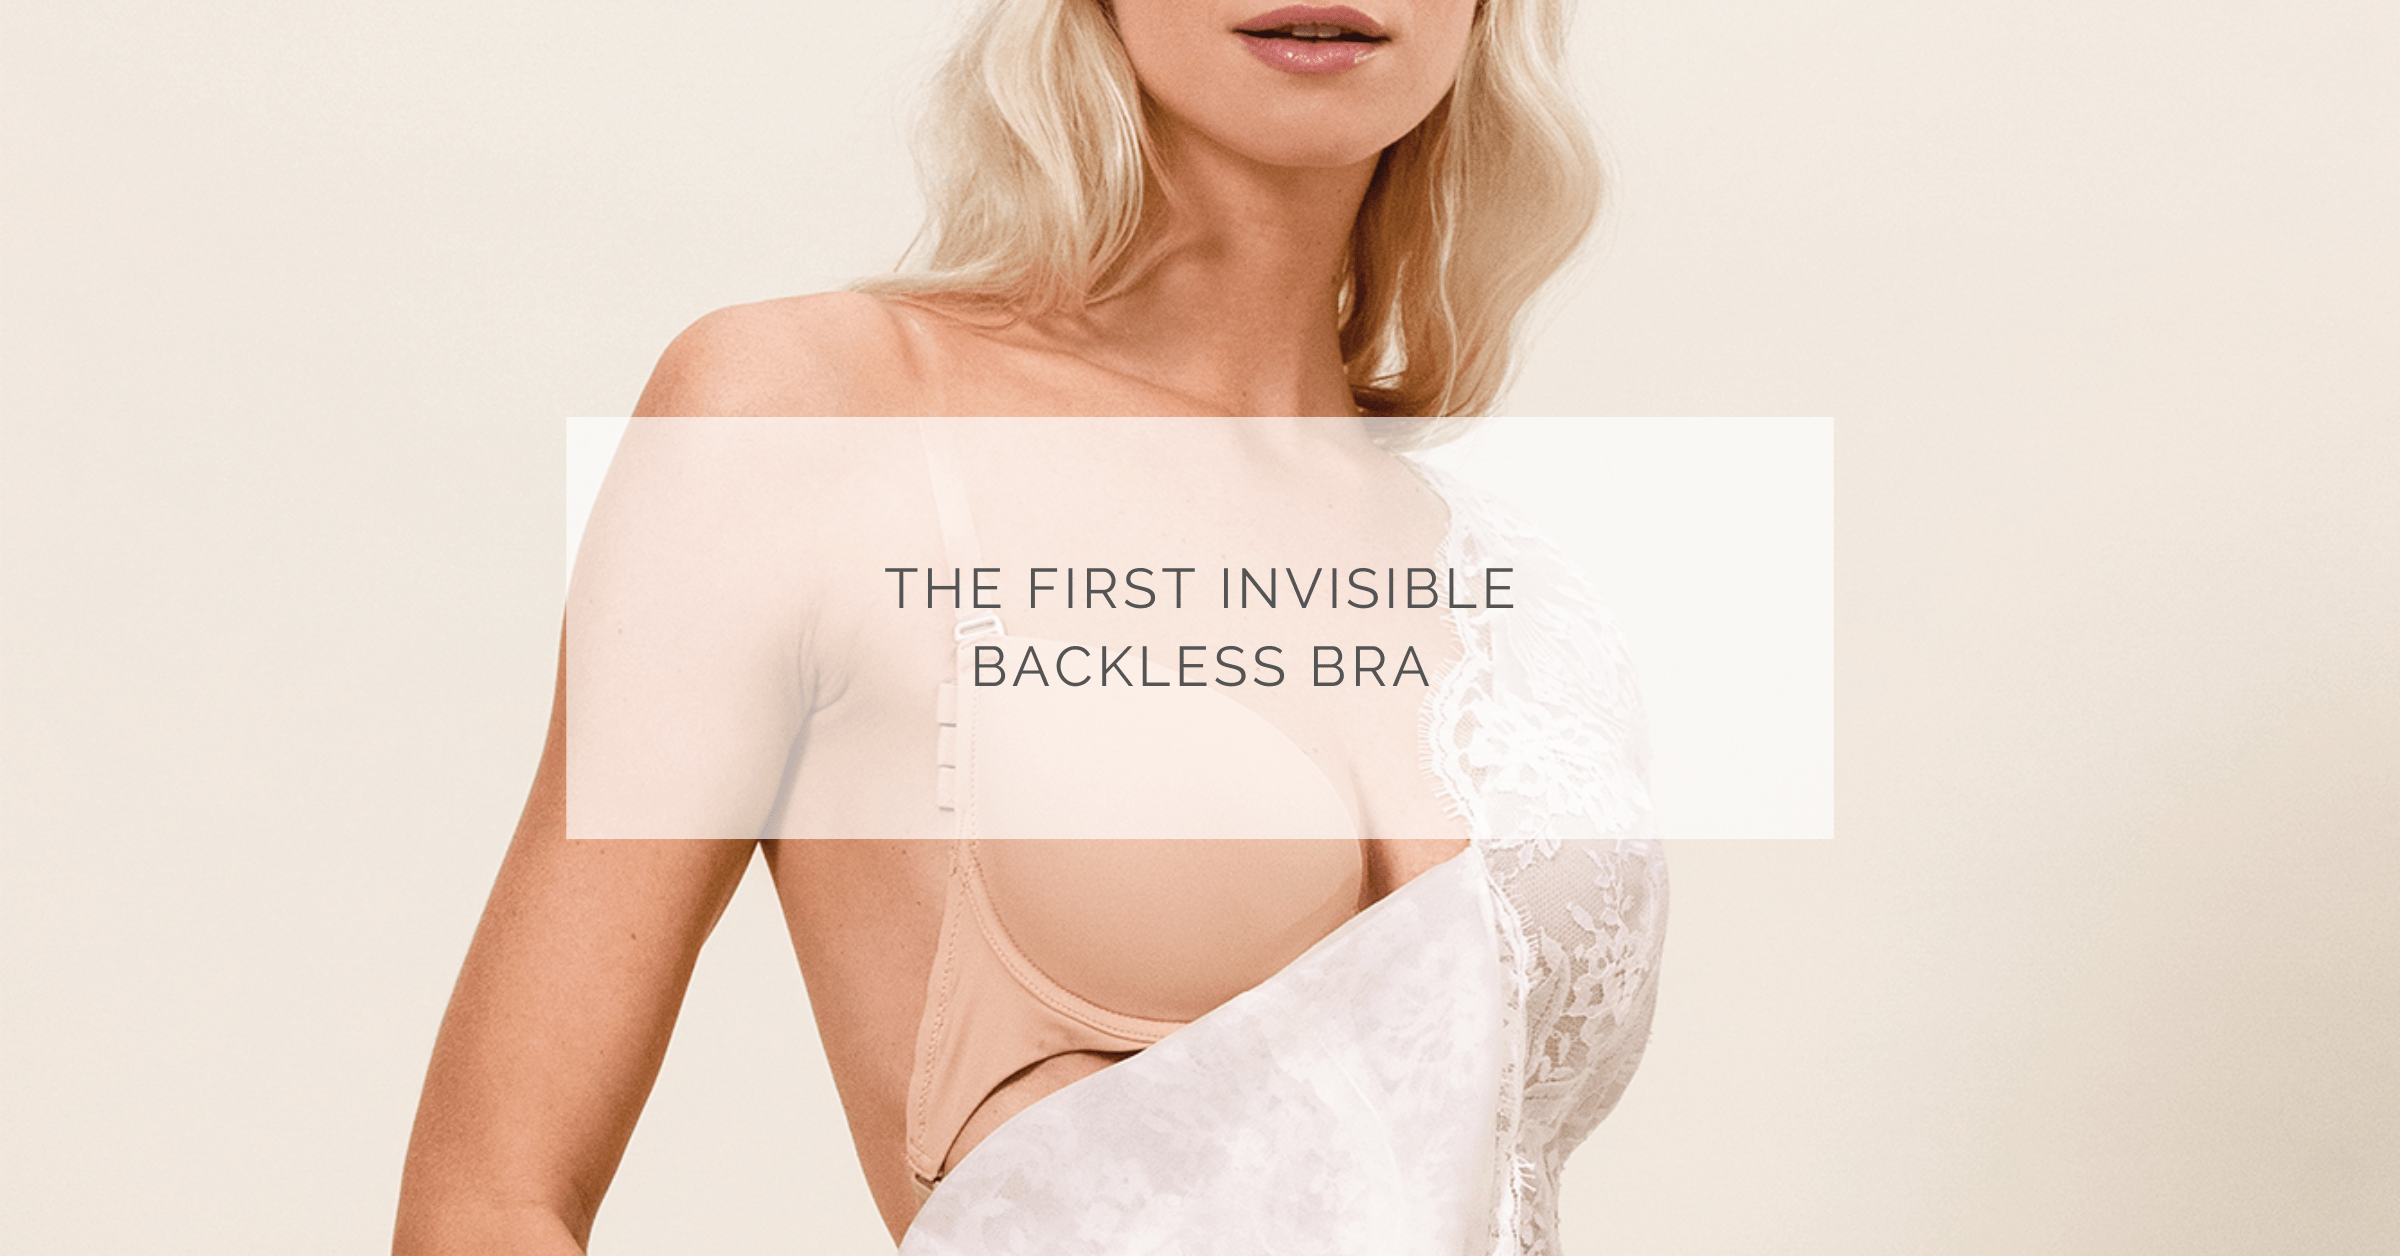 backless bra, push up, underwired, heritage, ivette bridal.